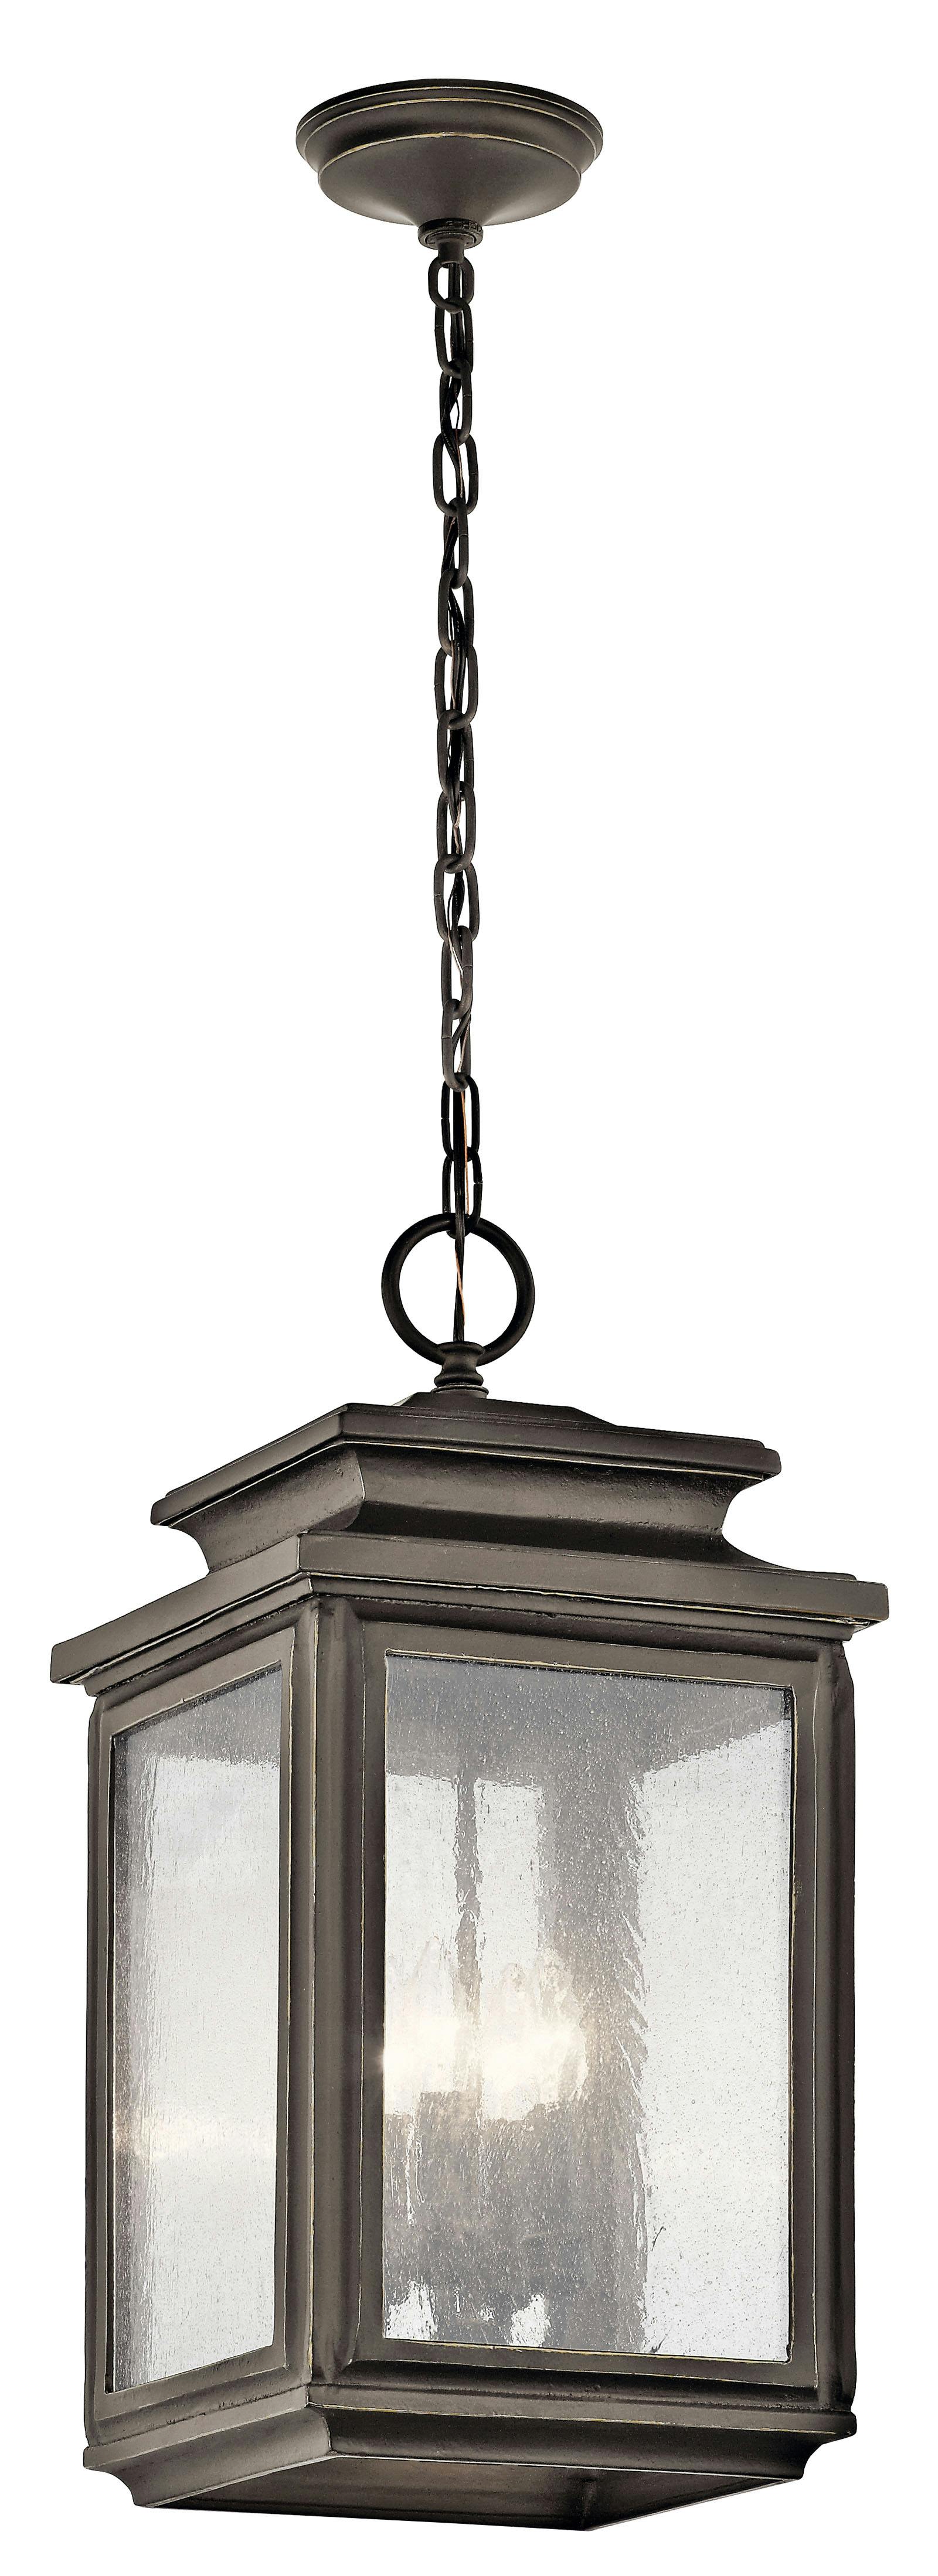 Wiscombe Park 4 Light Pendant Olde Bronze on a white background